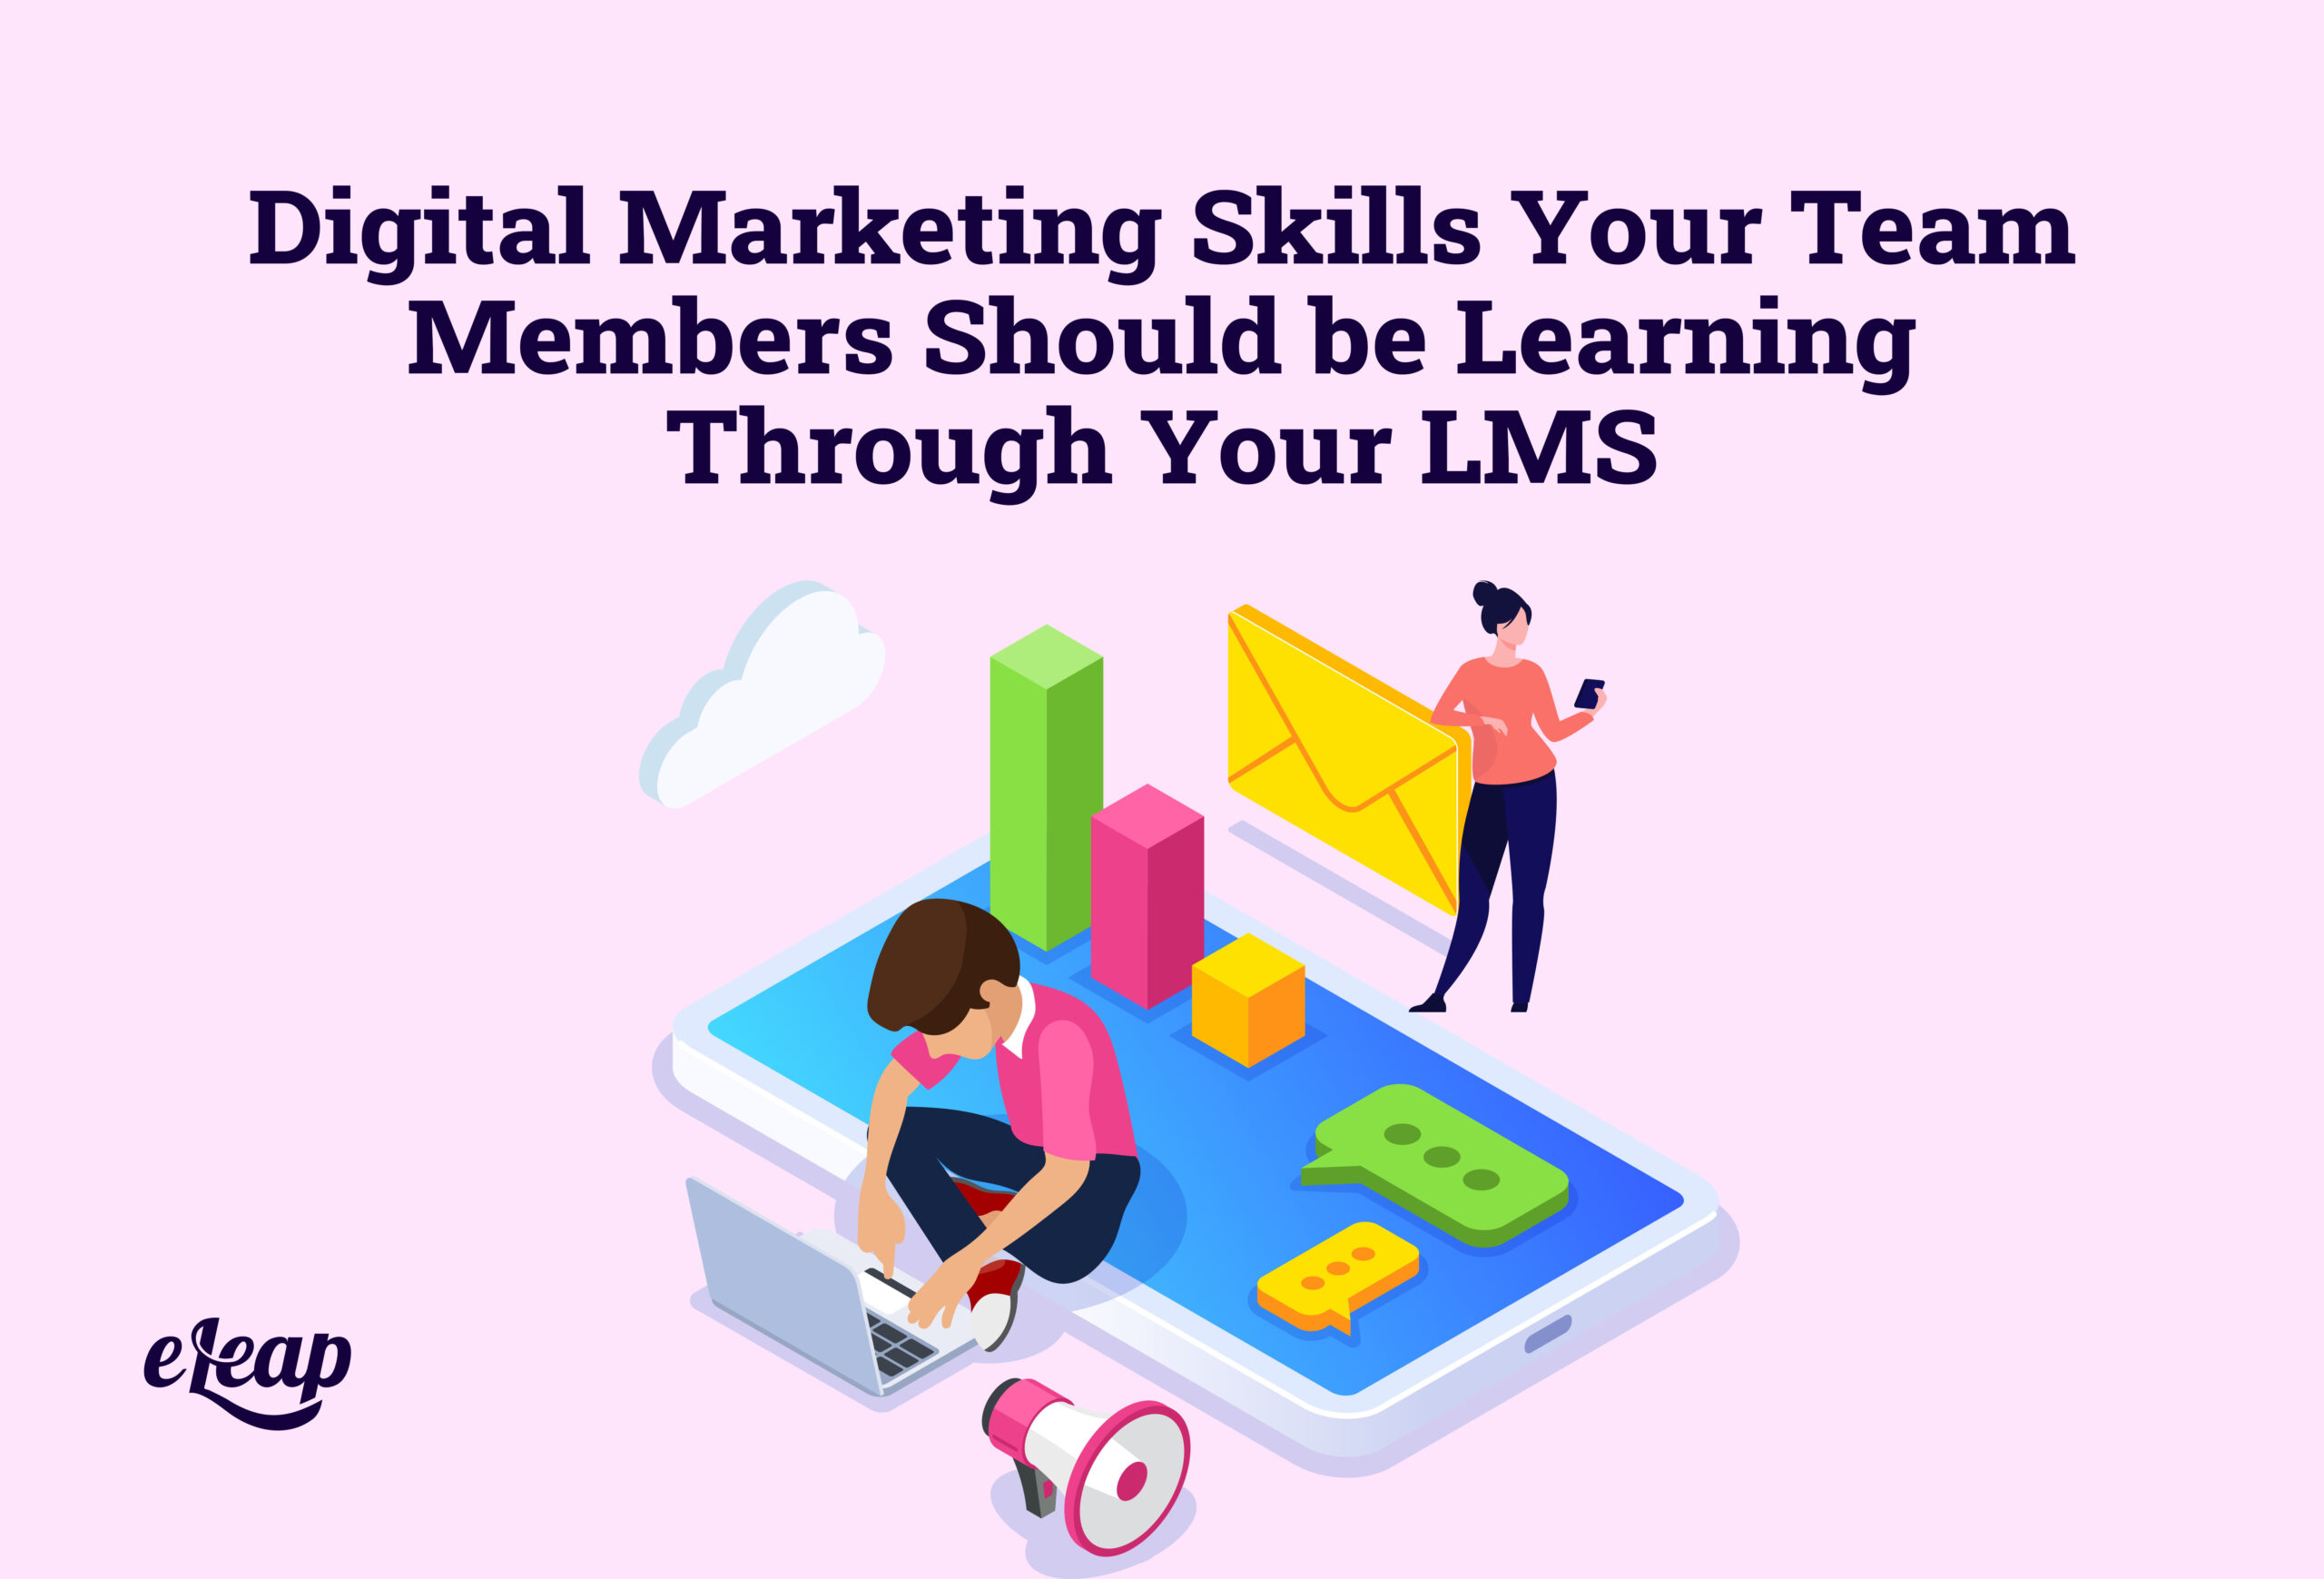 Digital Marketing Skills Your Team Members Should be Learning Through Your LMS